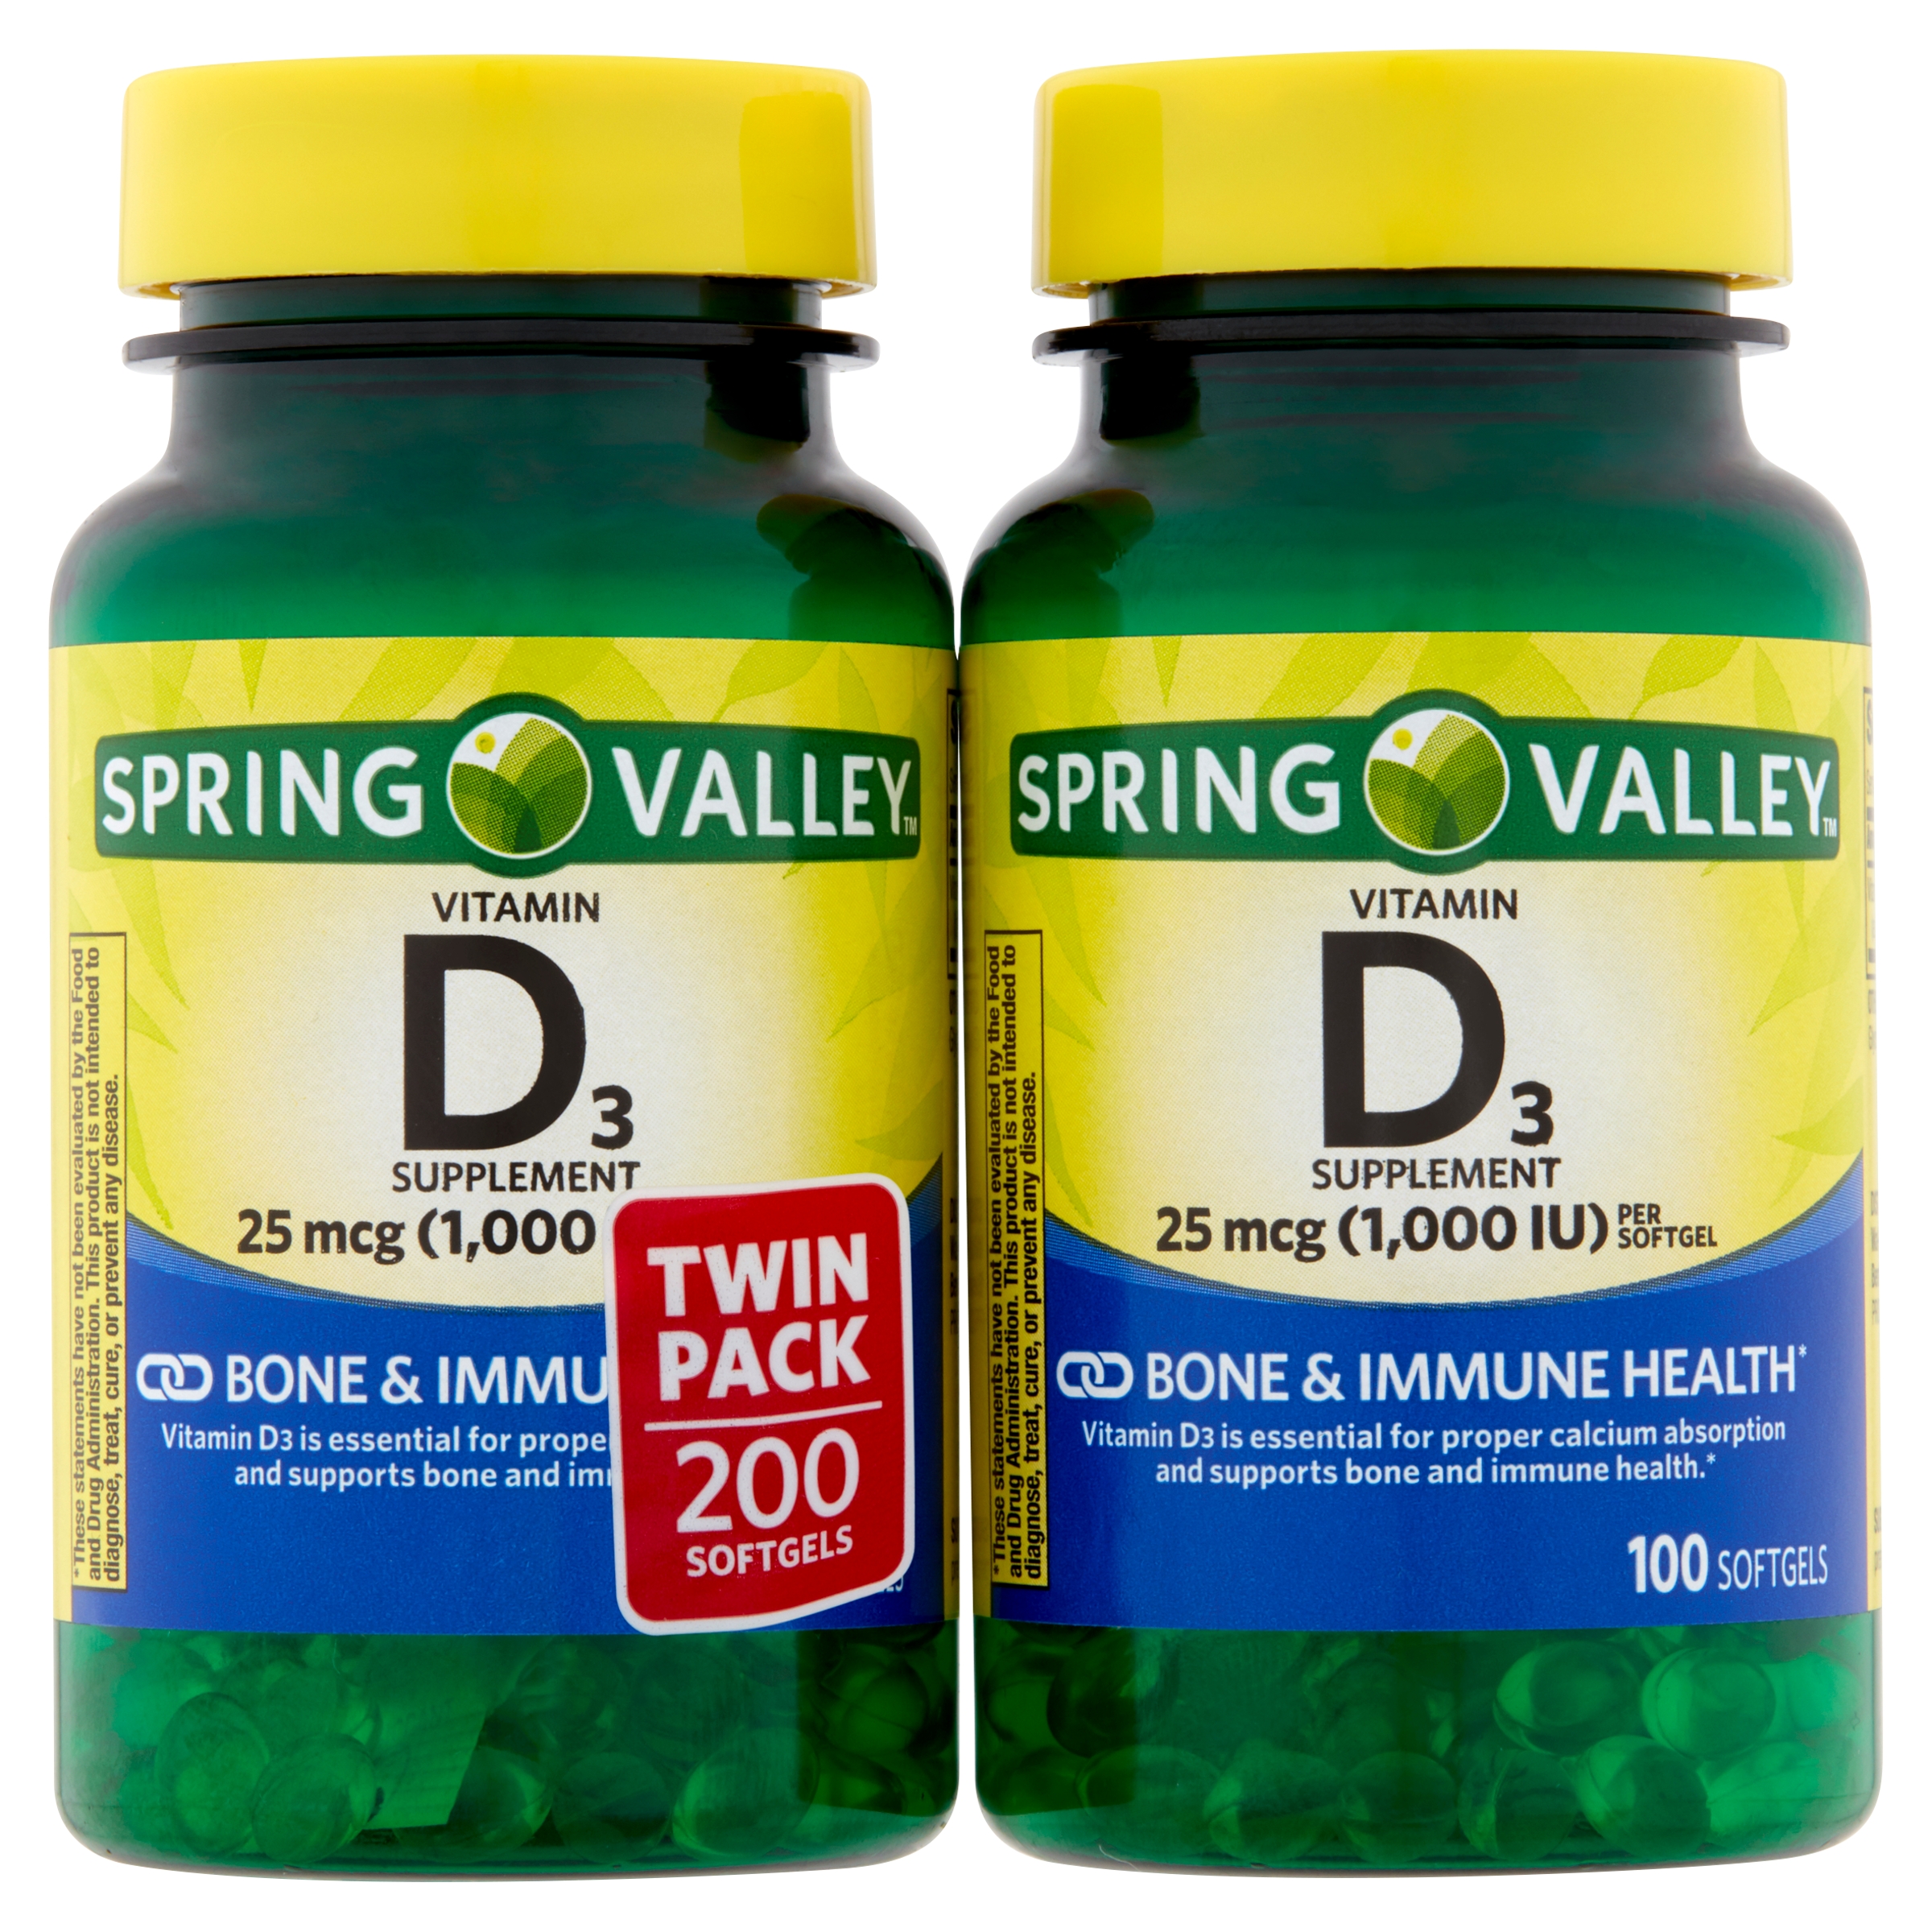 Spring Valley Vitamin D3 Softgels, 25mcg, 1,000 IU, 100 Count, 2 Pack - image 1 of 10